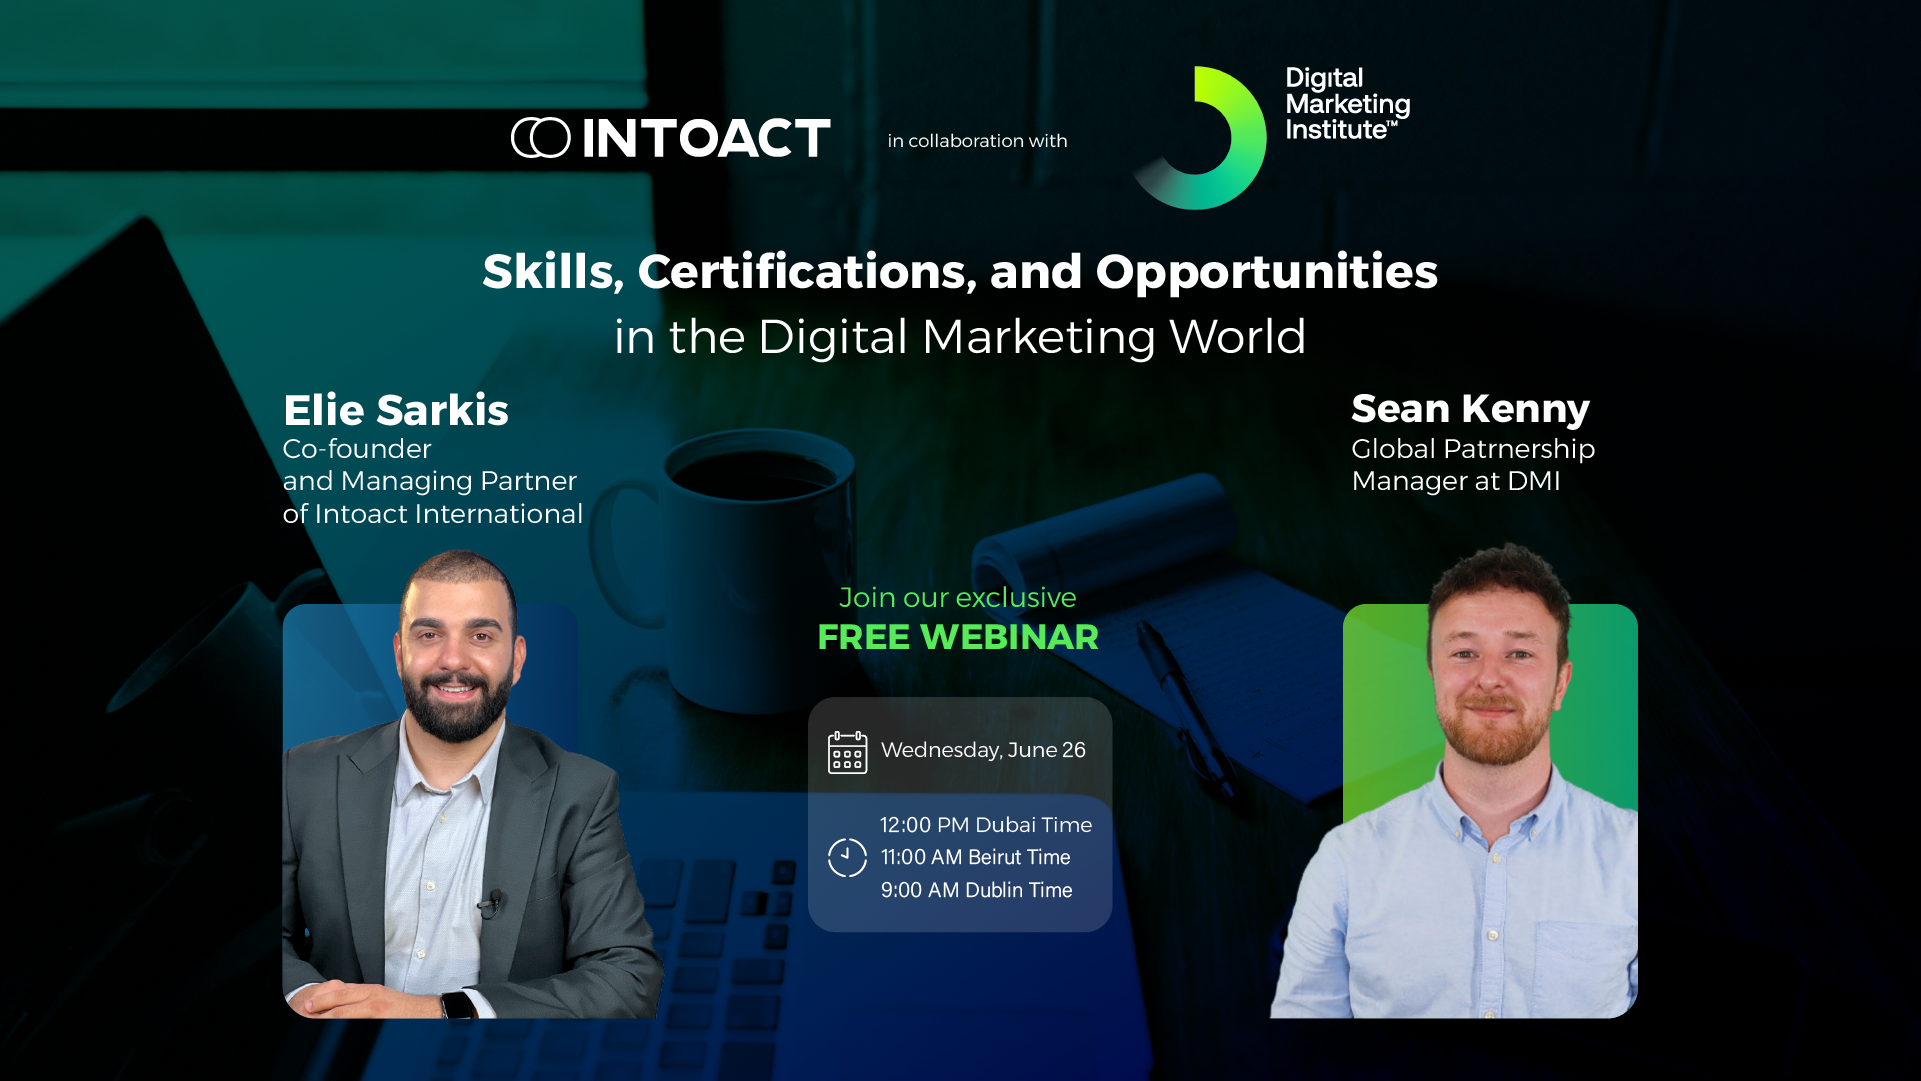 Mastering Digital Marketing with Elie Sarkis and Sean Kenny